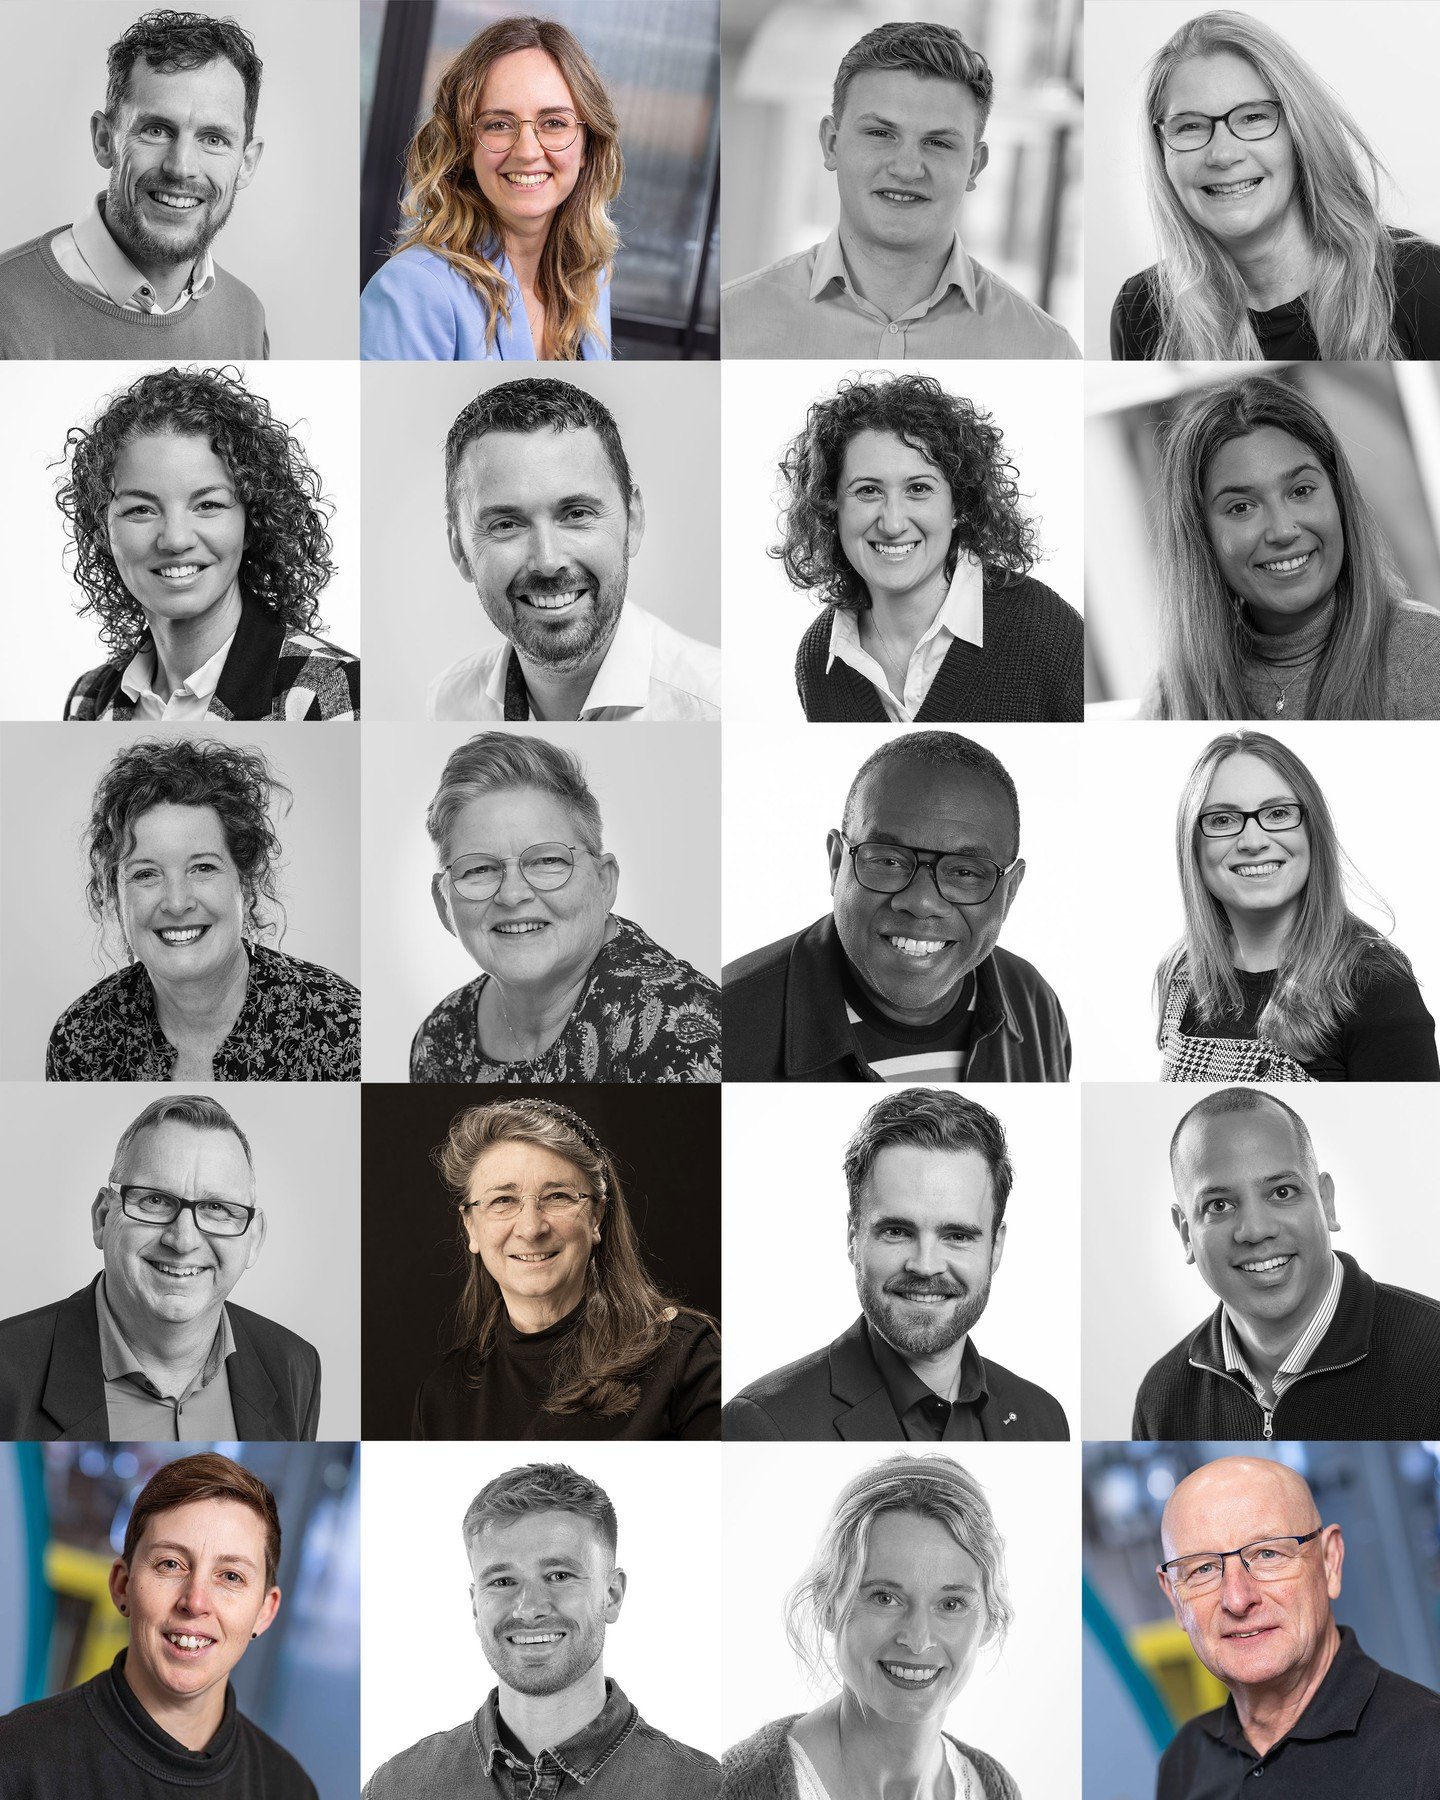 A random selection of some of the profile pictures that we took over the last few months. Great fun as always to meet such a variety of people and trying to make them feel comfortable in front of the camera! #headshots #profilepictures #linkedinprofi